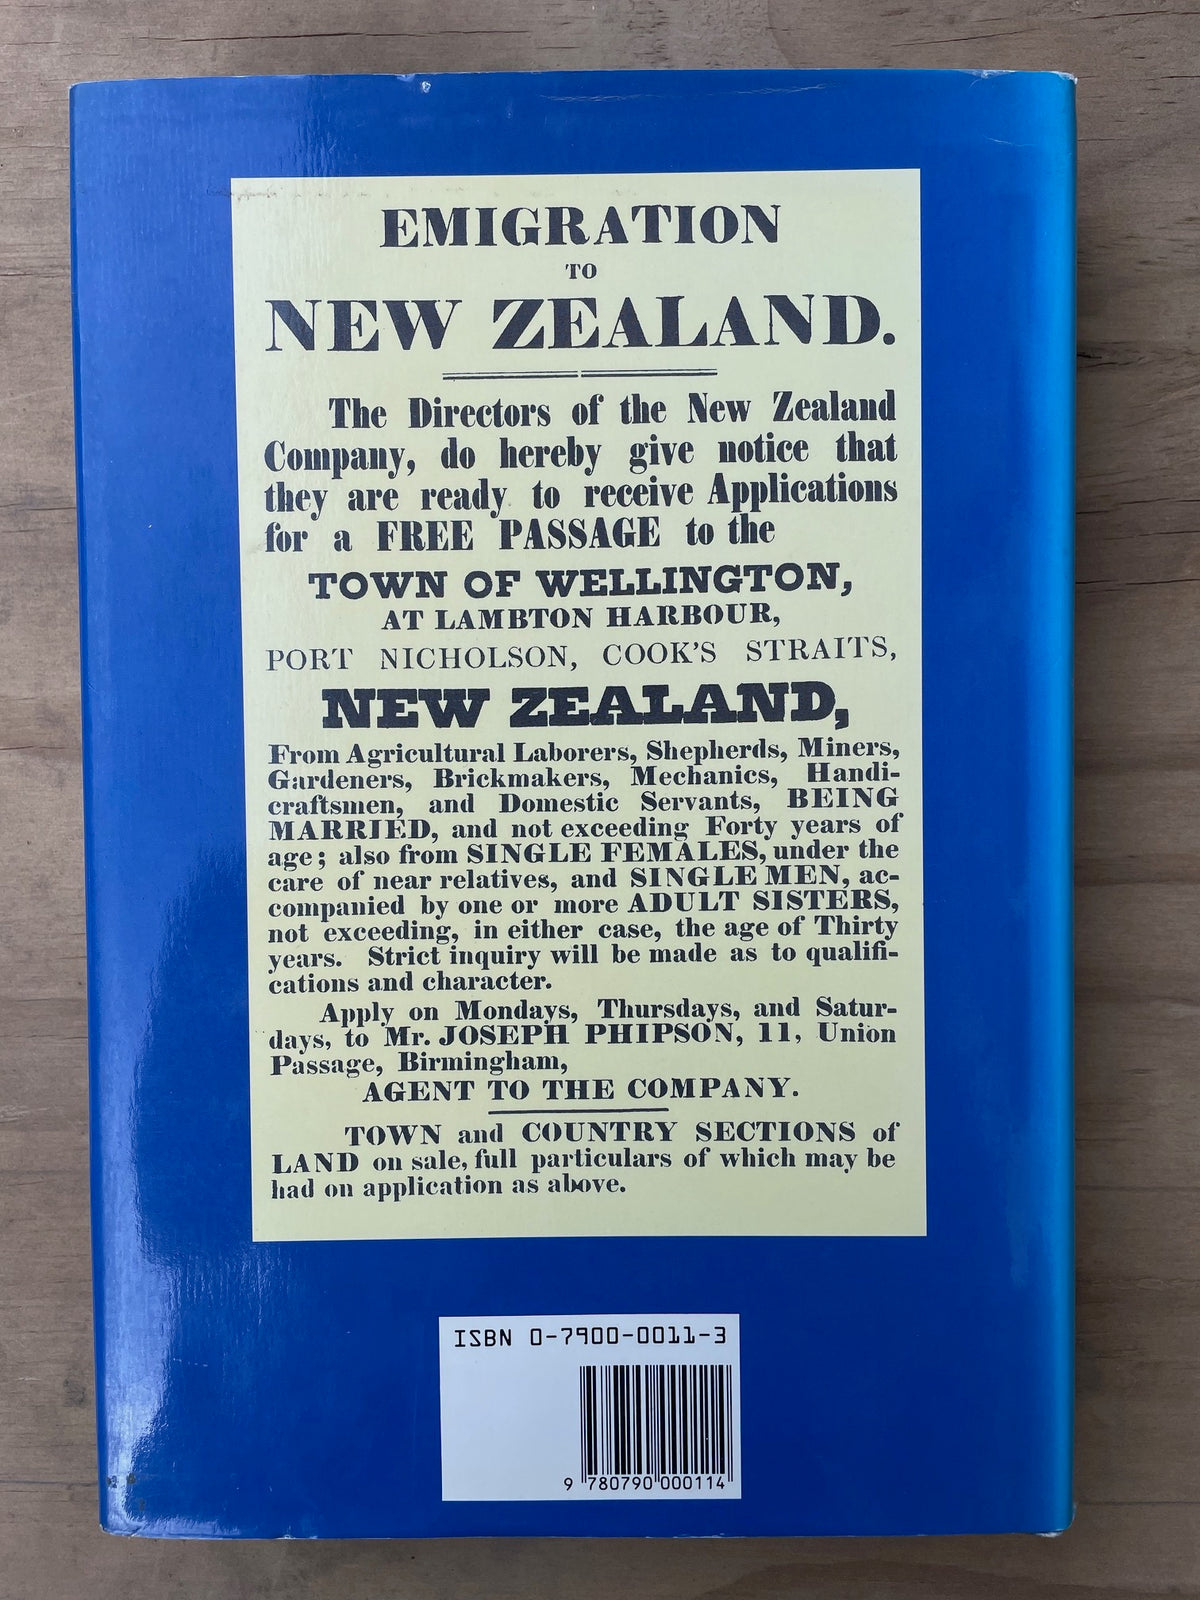 Fatal Success: A history of the New Zealand Company - Patricia Burns